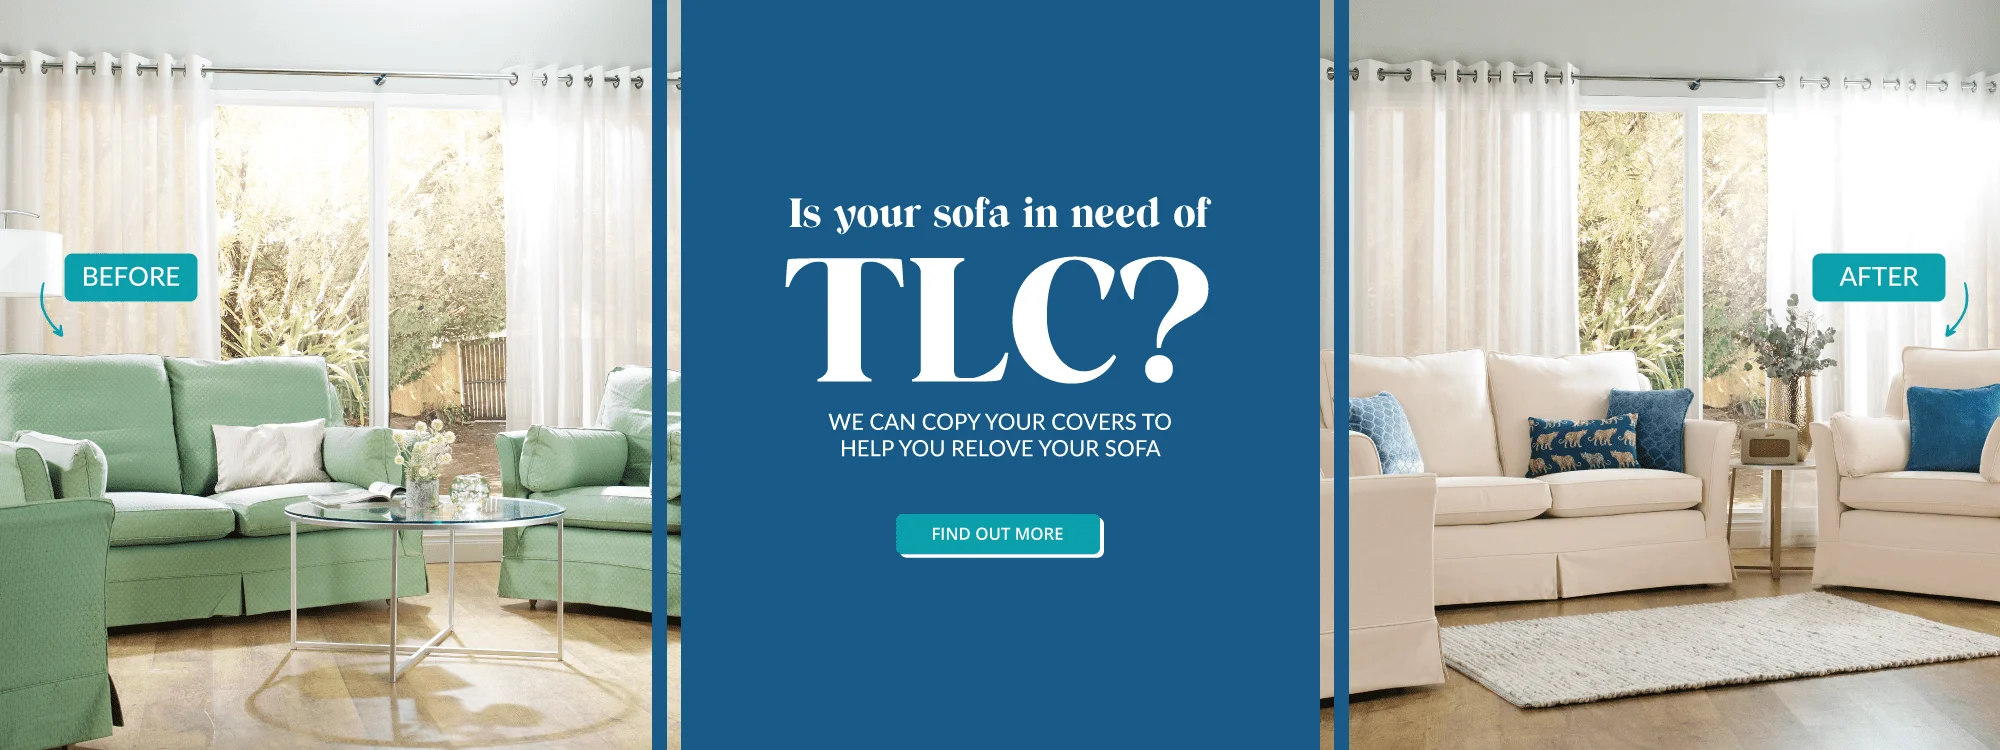 Is your sofa in need of TLC?